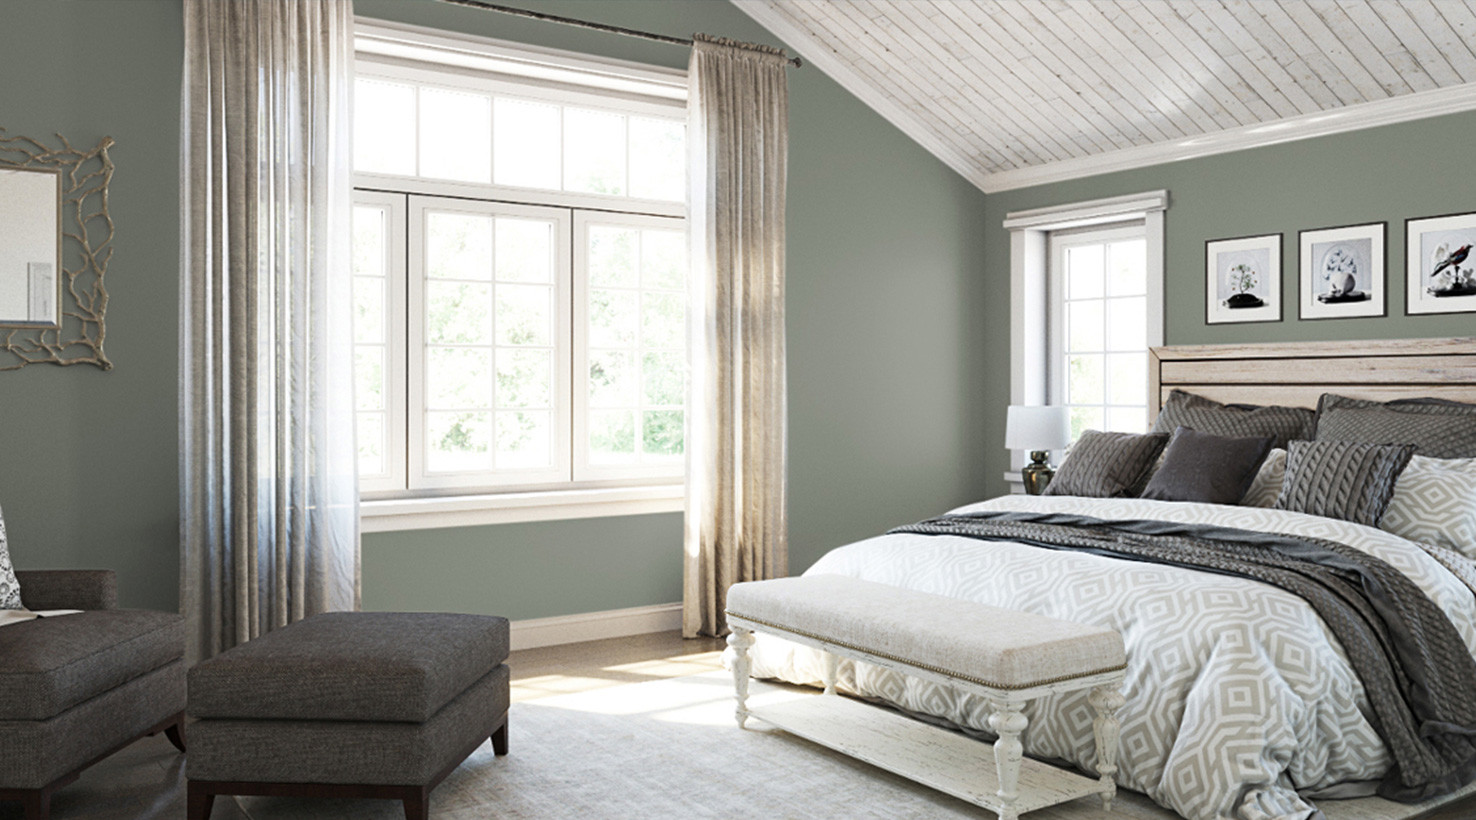 Popular Bedroom Colors
 Bedroom Paint Color Ideas Inspiration Gallery